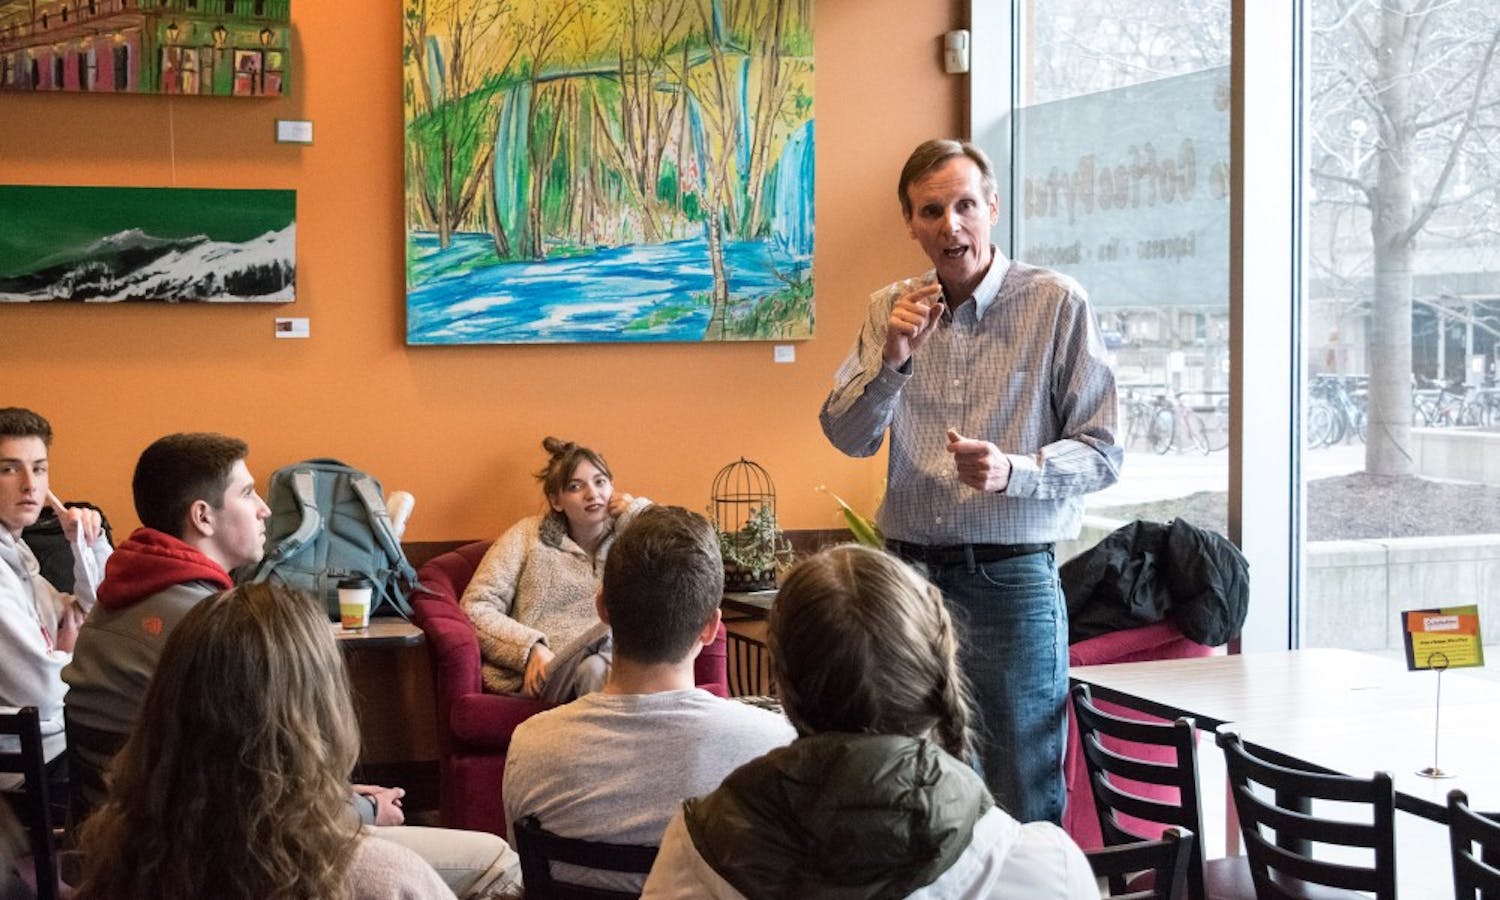 The UW-Madison College Democrats hosted gubernatorial candidate and open government activist Mike McCabe on Tuesday to talk to students about the issues central to his campaign.